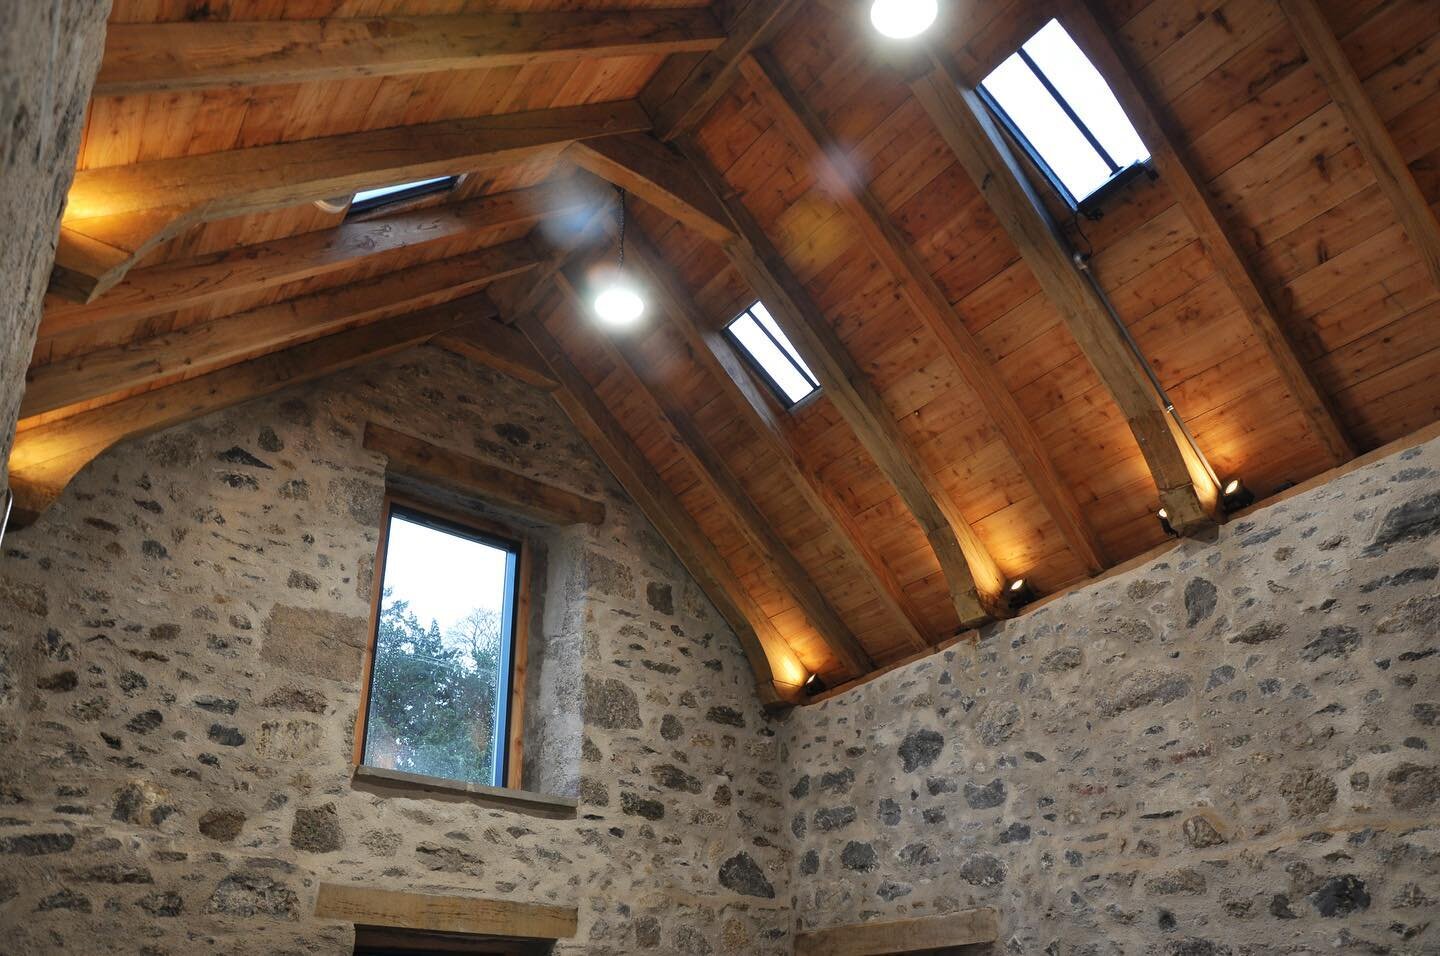 Captured some completion photos of the gardeners workshop at Maryculter today. Looking 👌🏻. #architecture #conservation #aberdeenshirearchitects #stone #timber